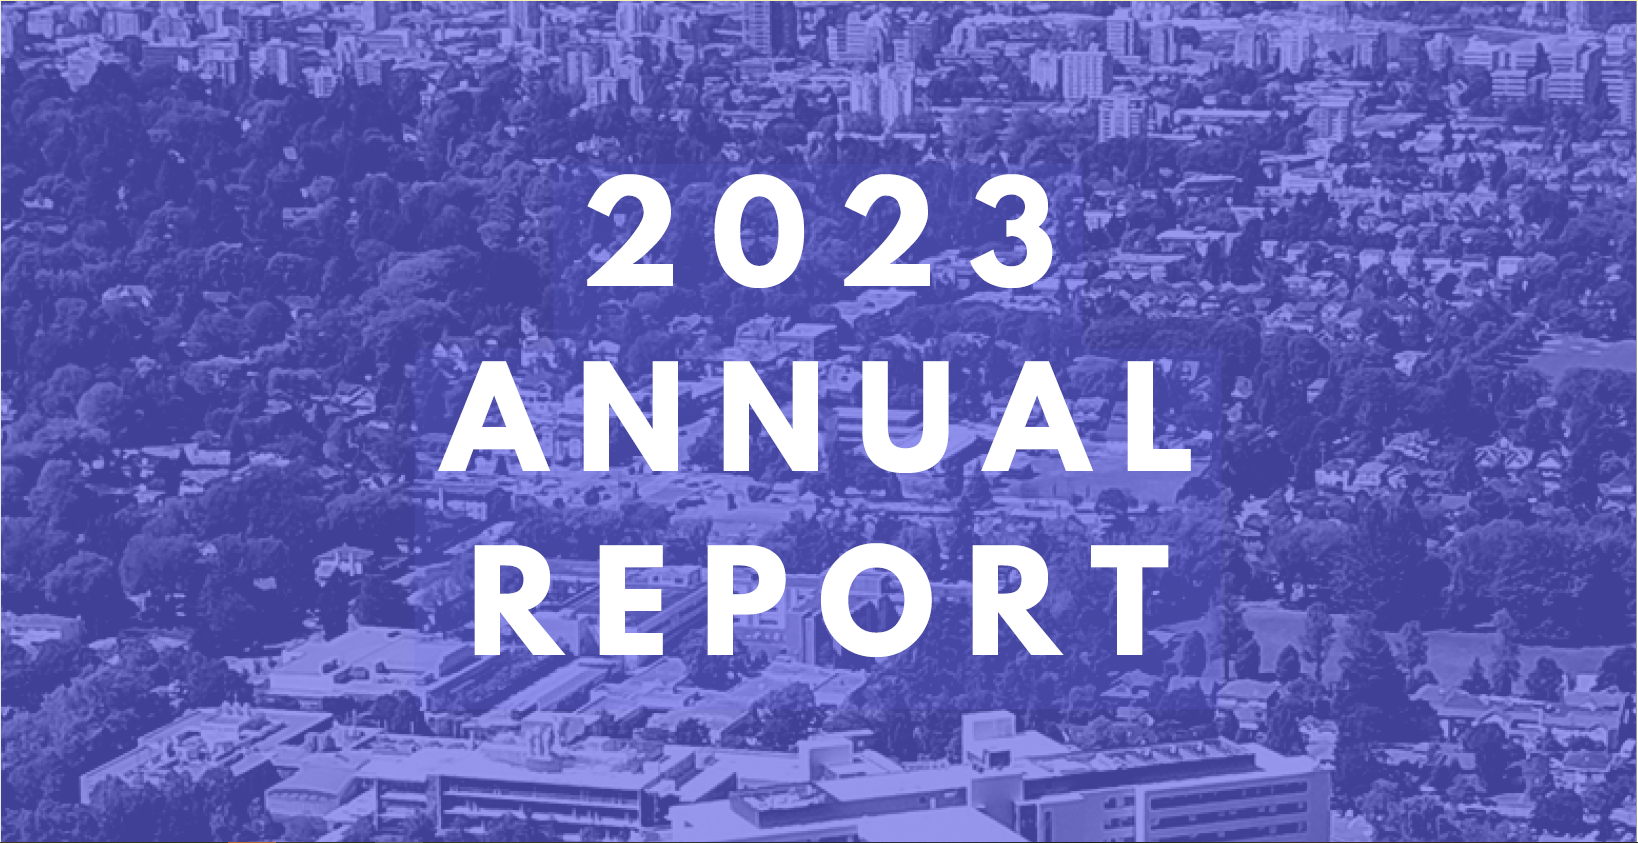 RID Program 2023 Annual Report is Now Available!